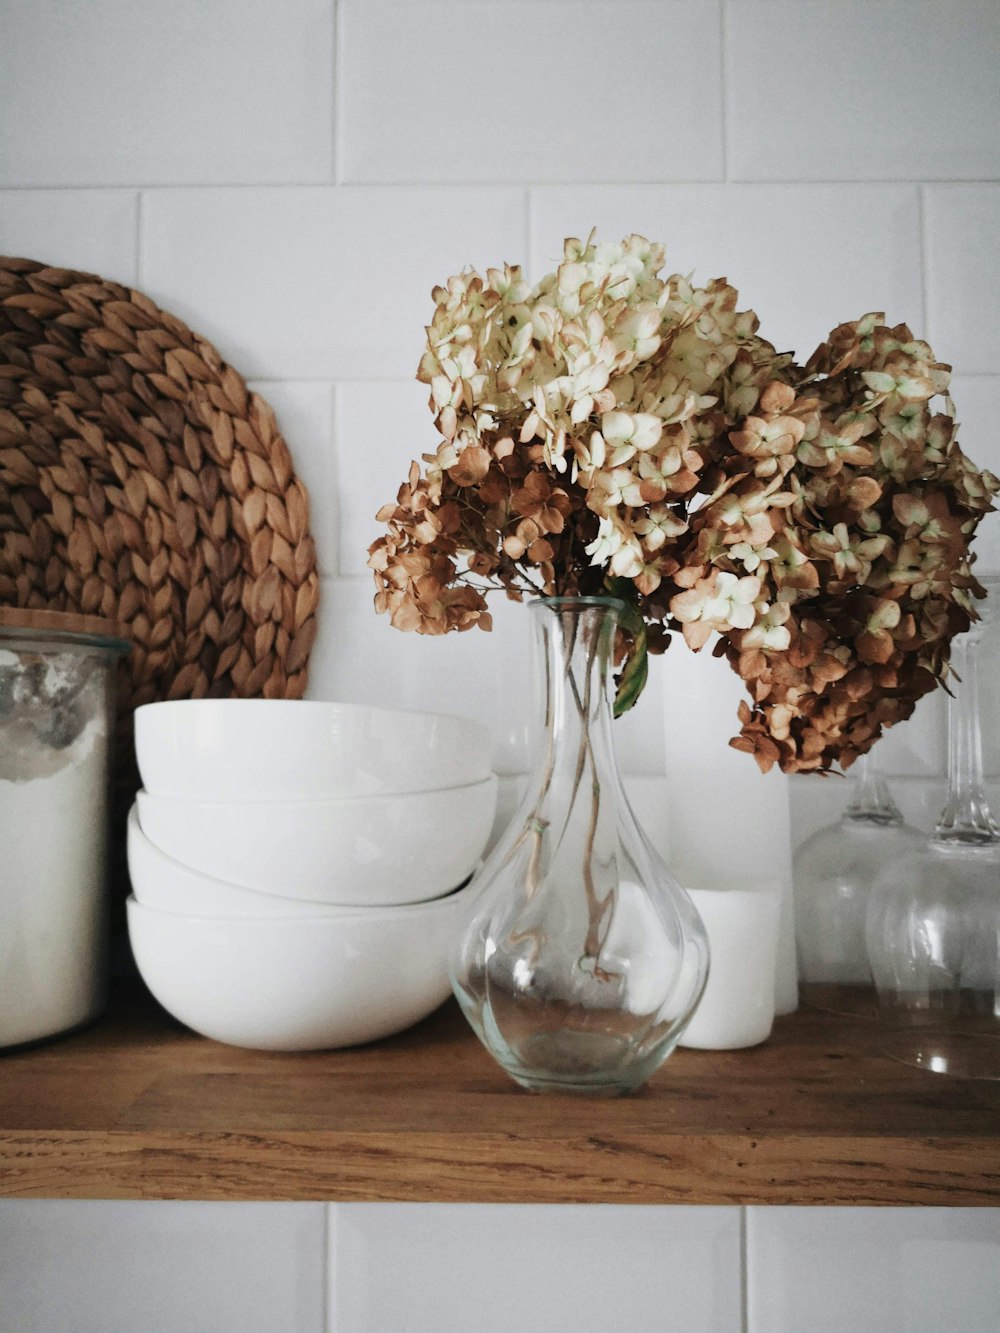 flowers in vase beside dishes